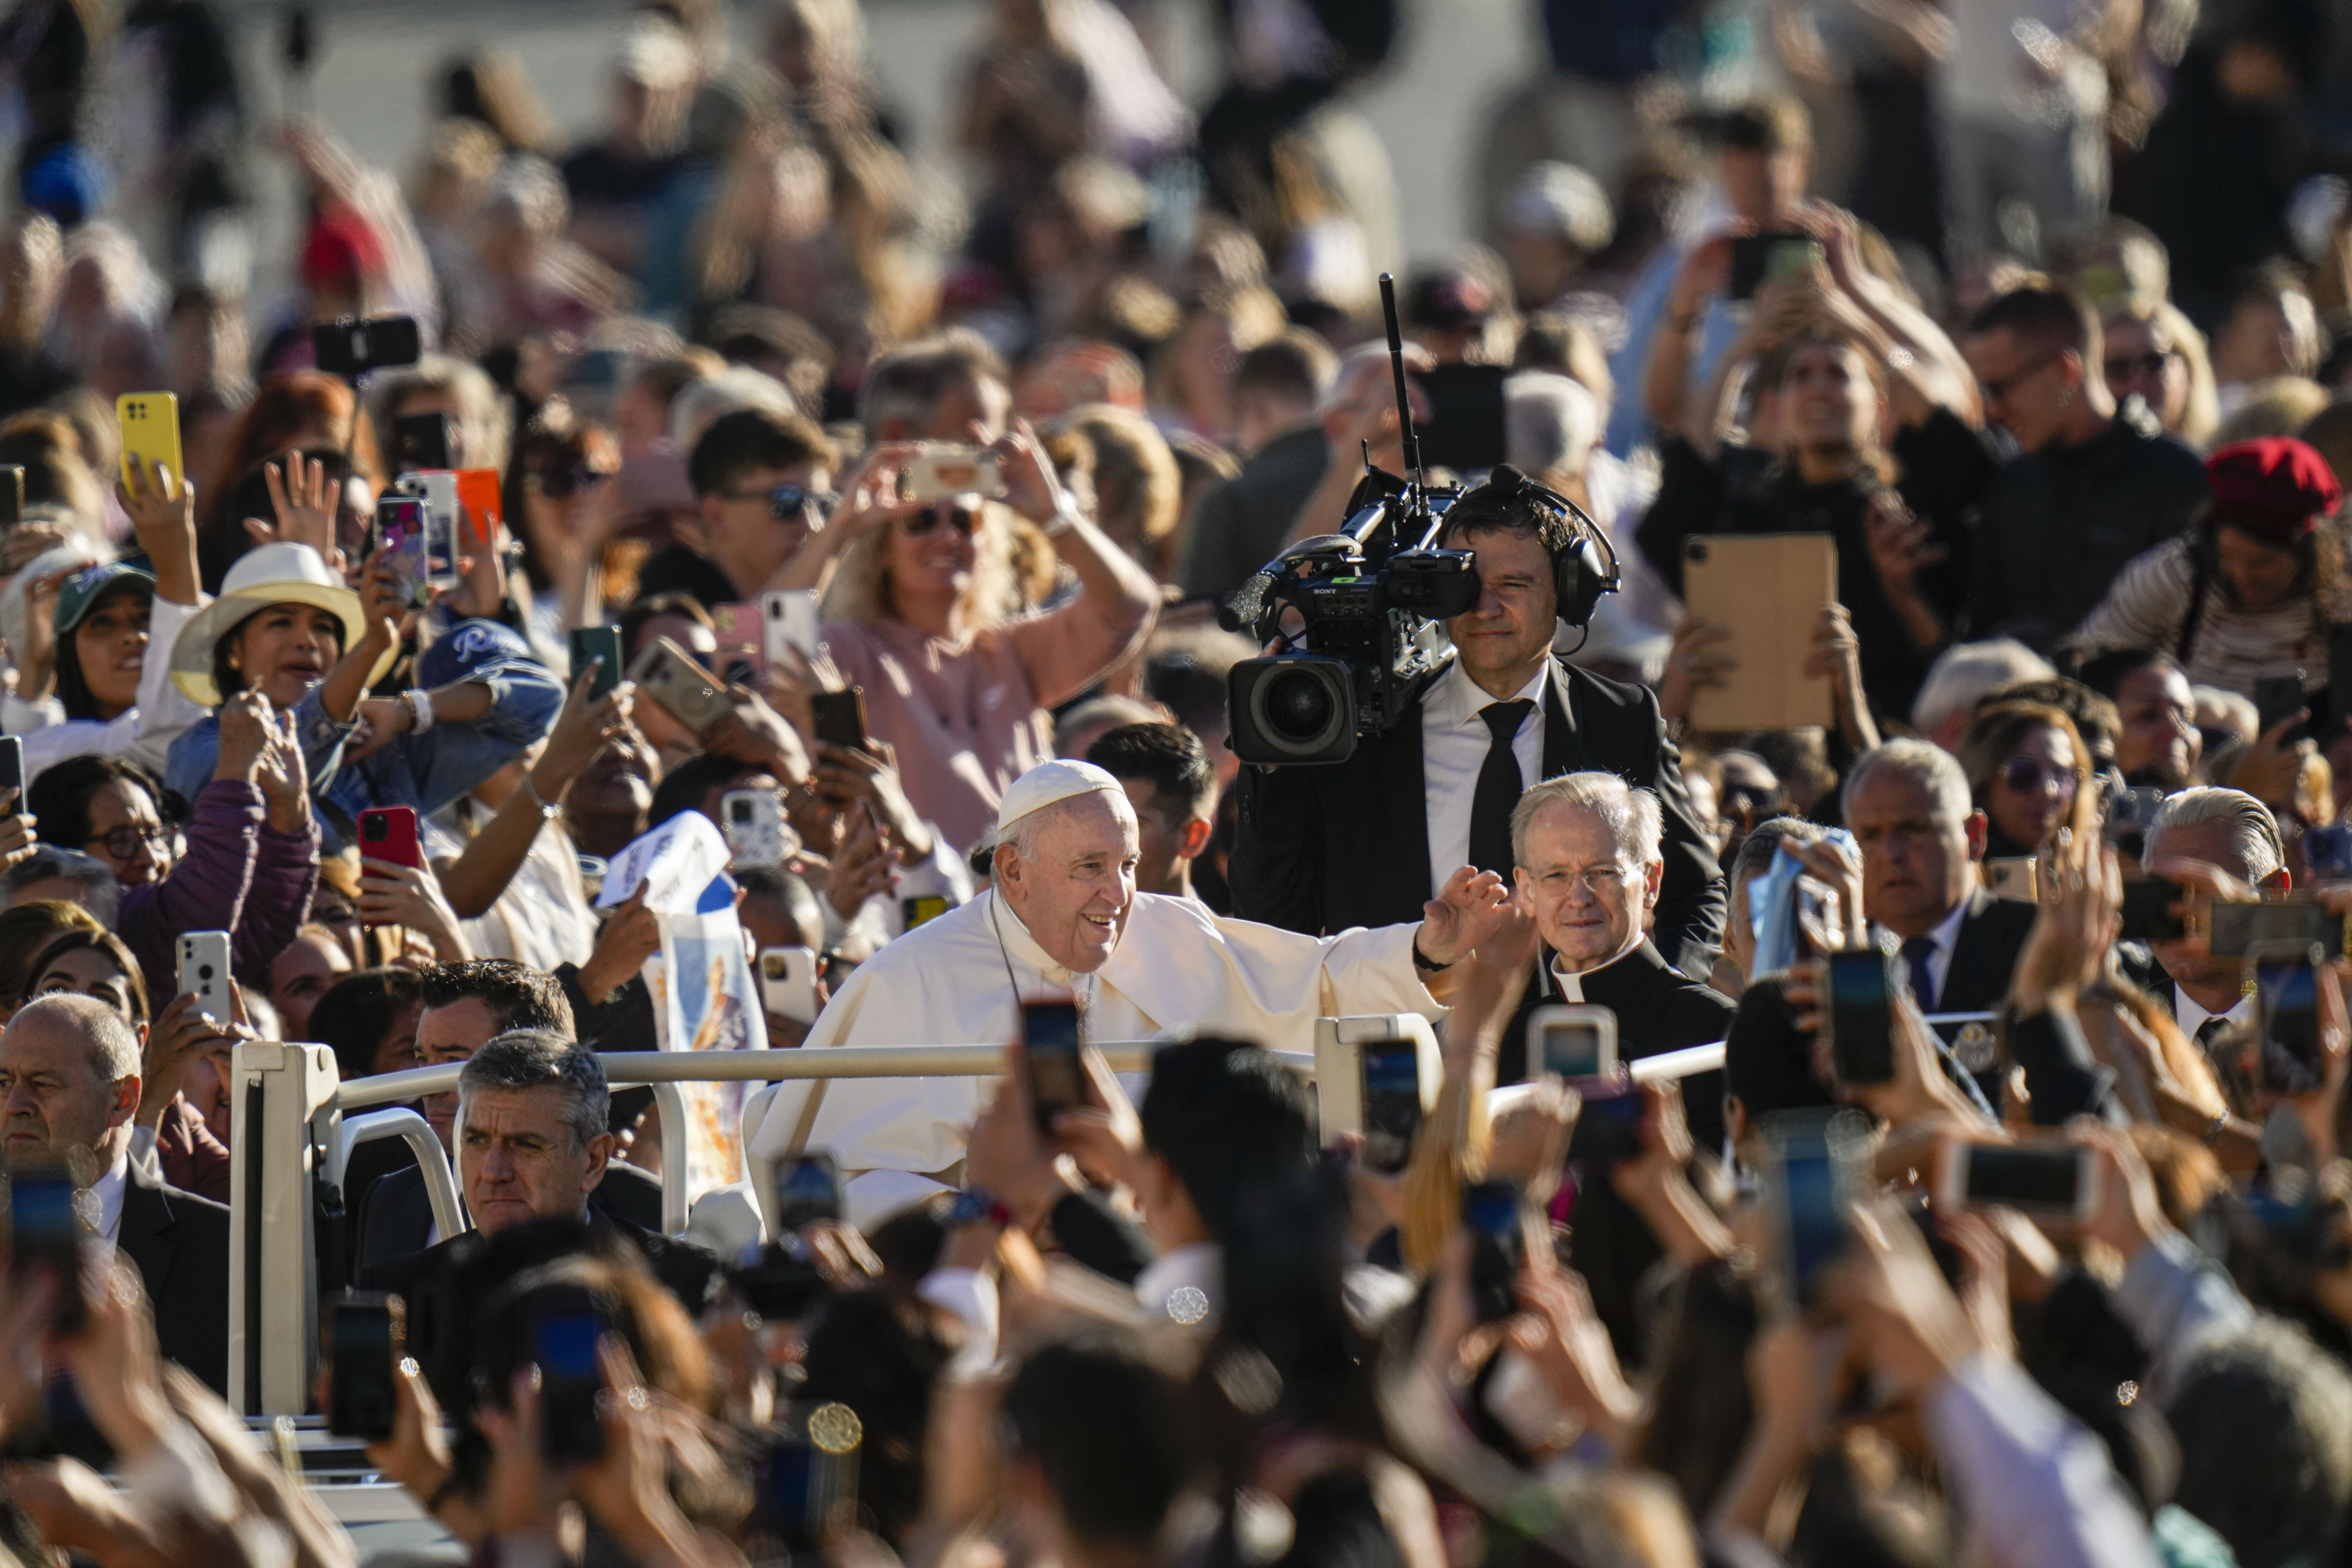 Pope Francis arrives for his weekly general audience in St. Pater's Square at The Vatican, Wednesday, Oct. 5, 2022. (AP Photo/Alessandra Tarantino)